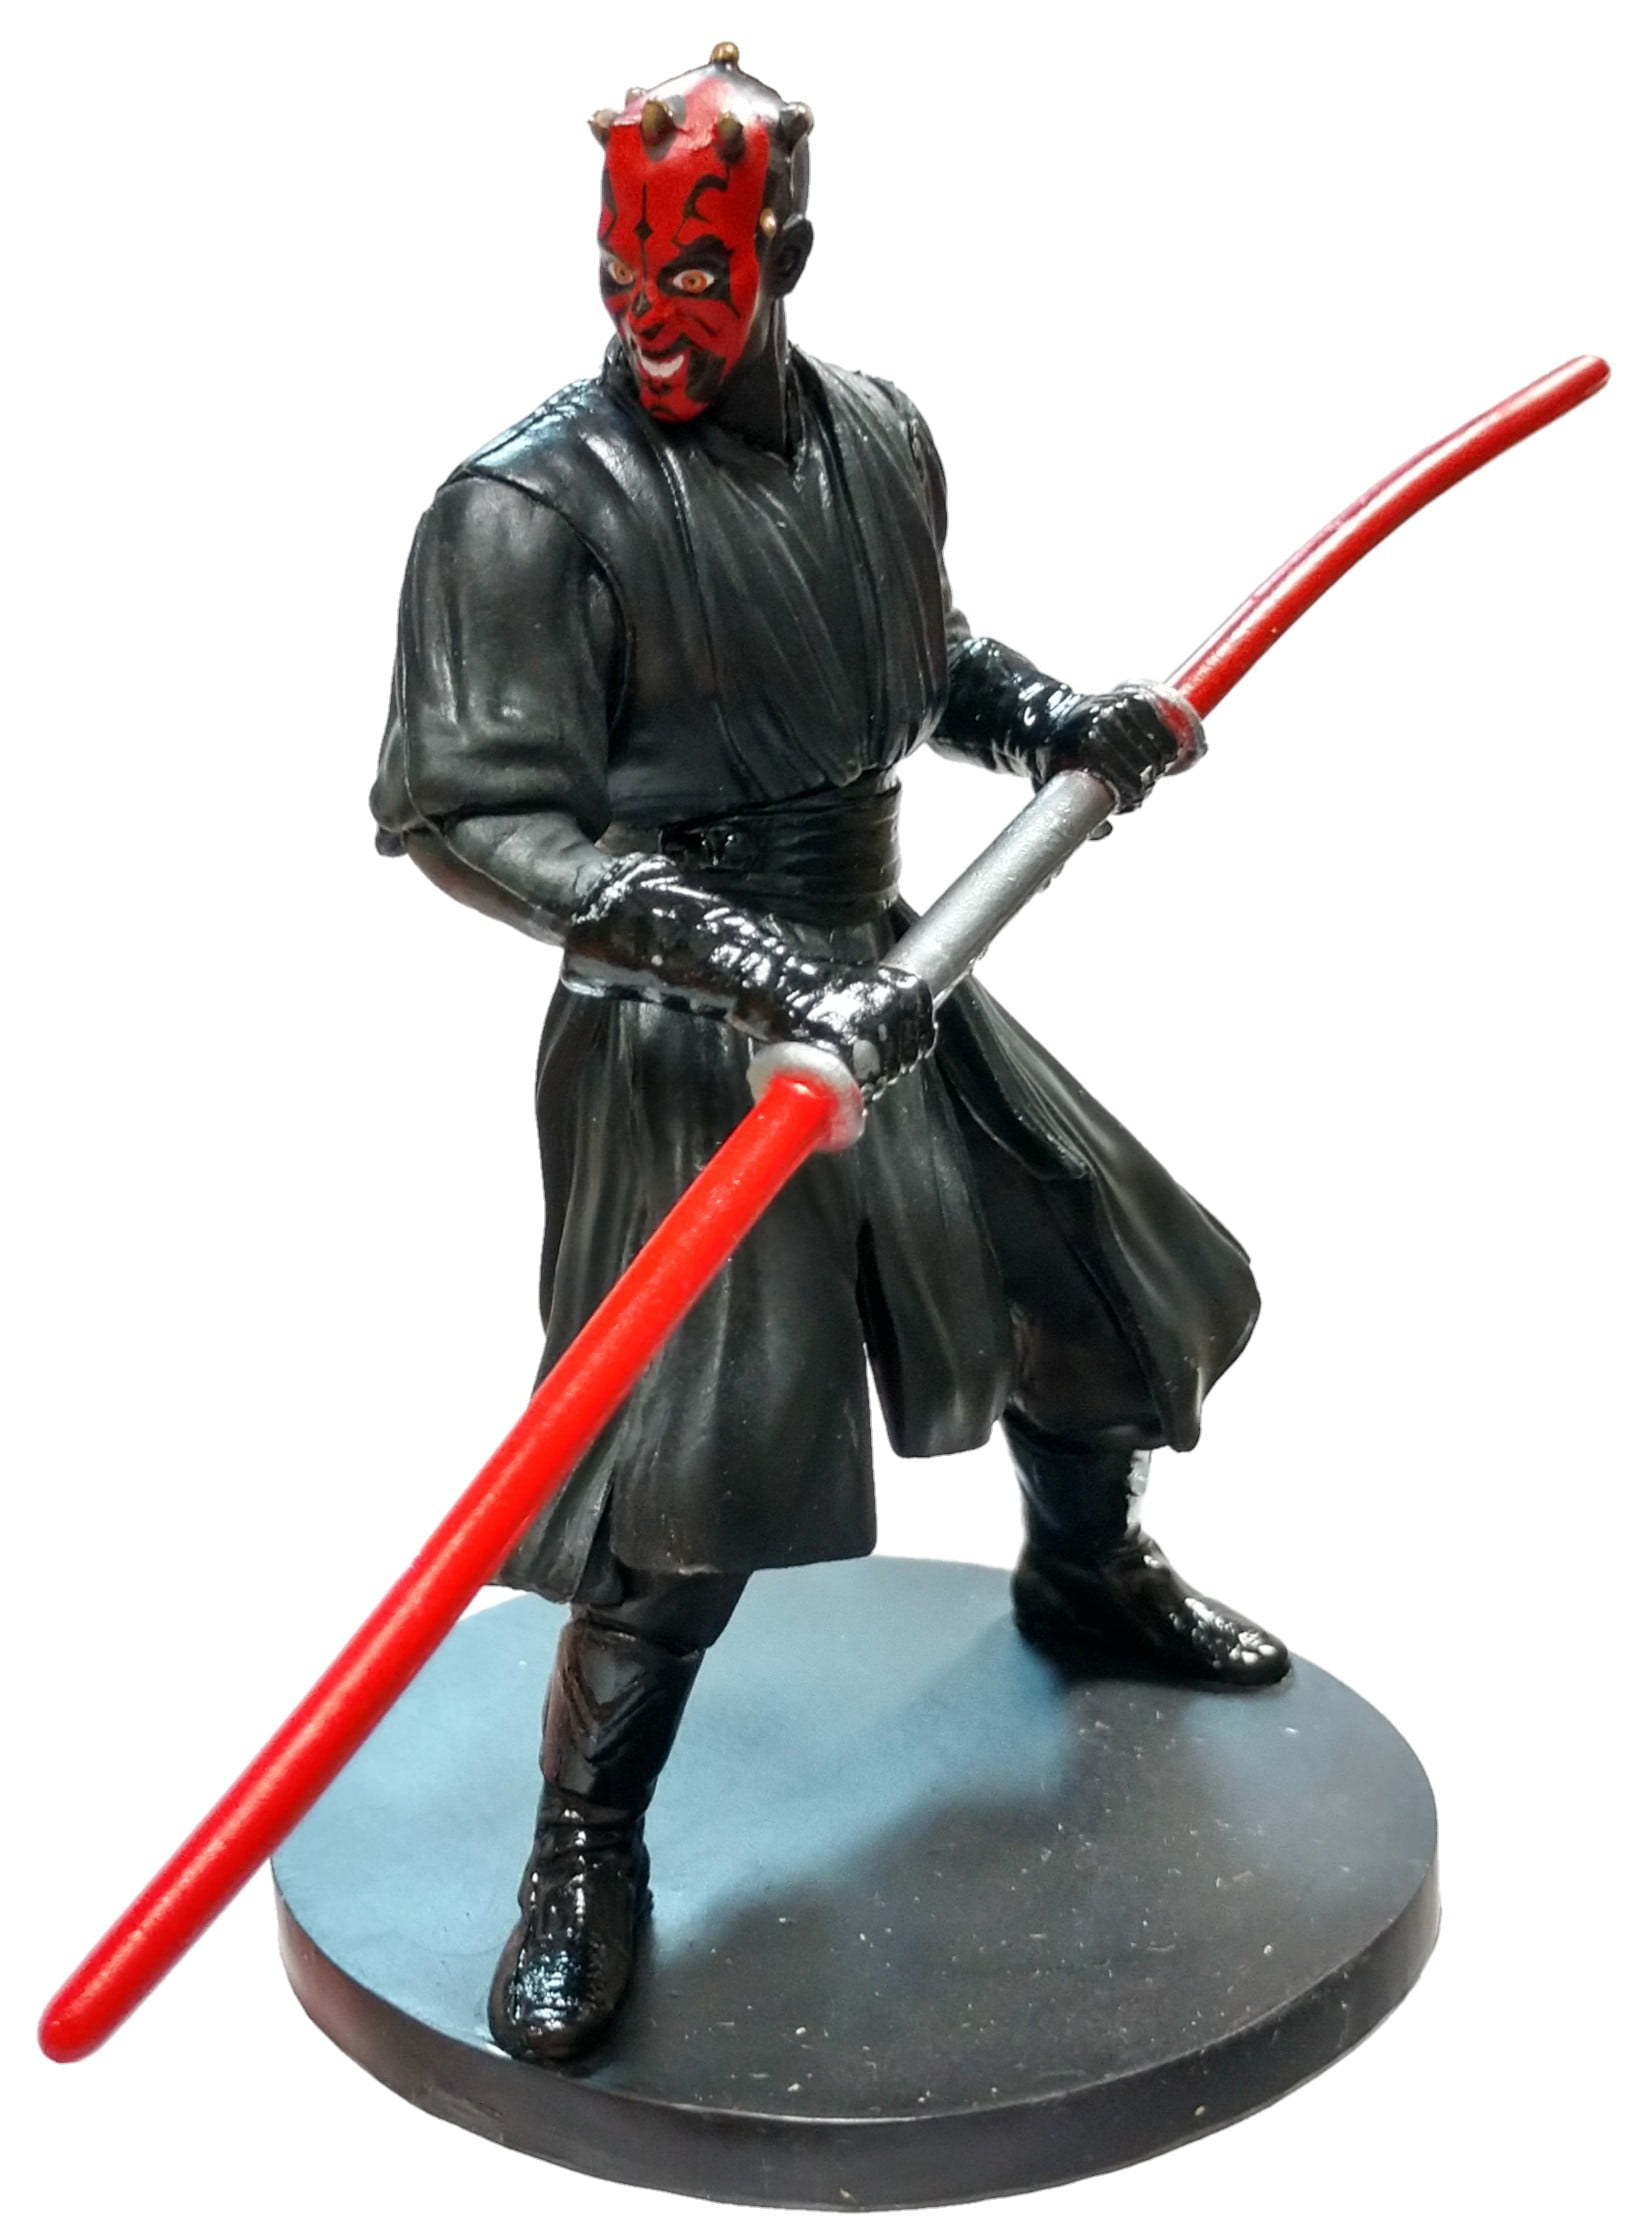 Hasbro Darth Maul Jedi Duel with Double-Bladed Lightsaber Action Figure for sale online 